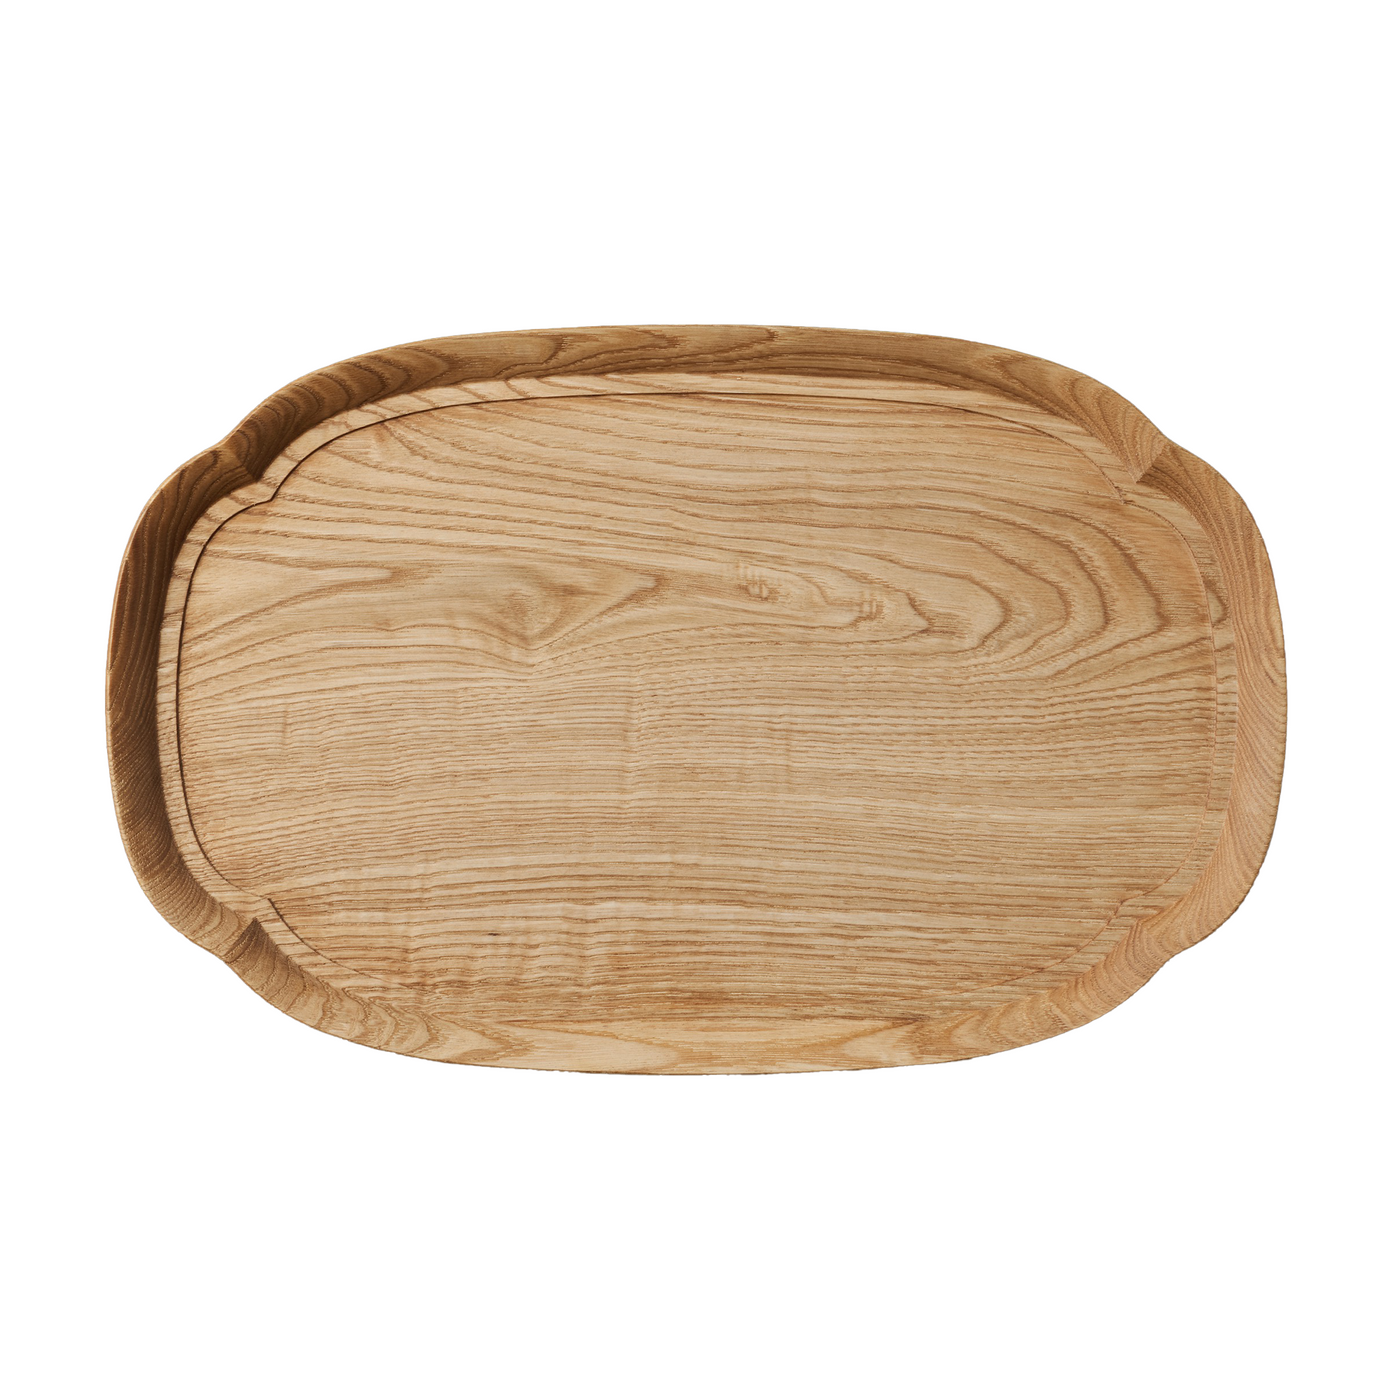 Wooden Tray Flowering Quince - Large